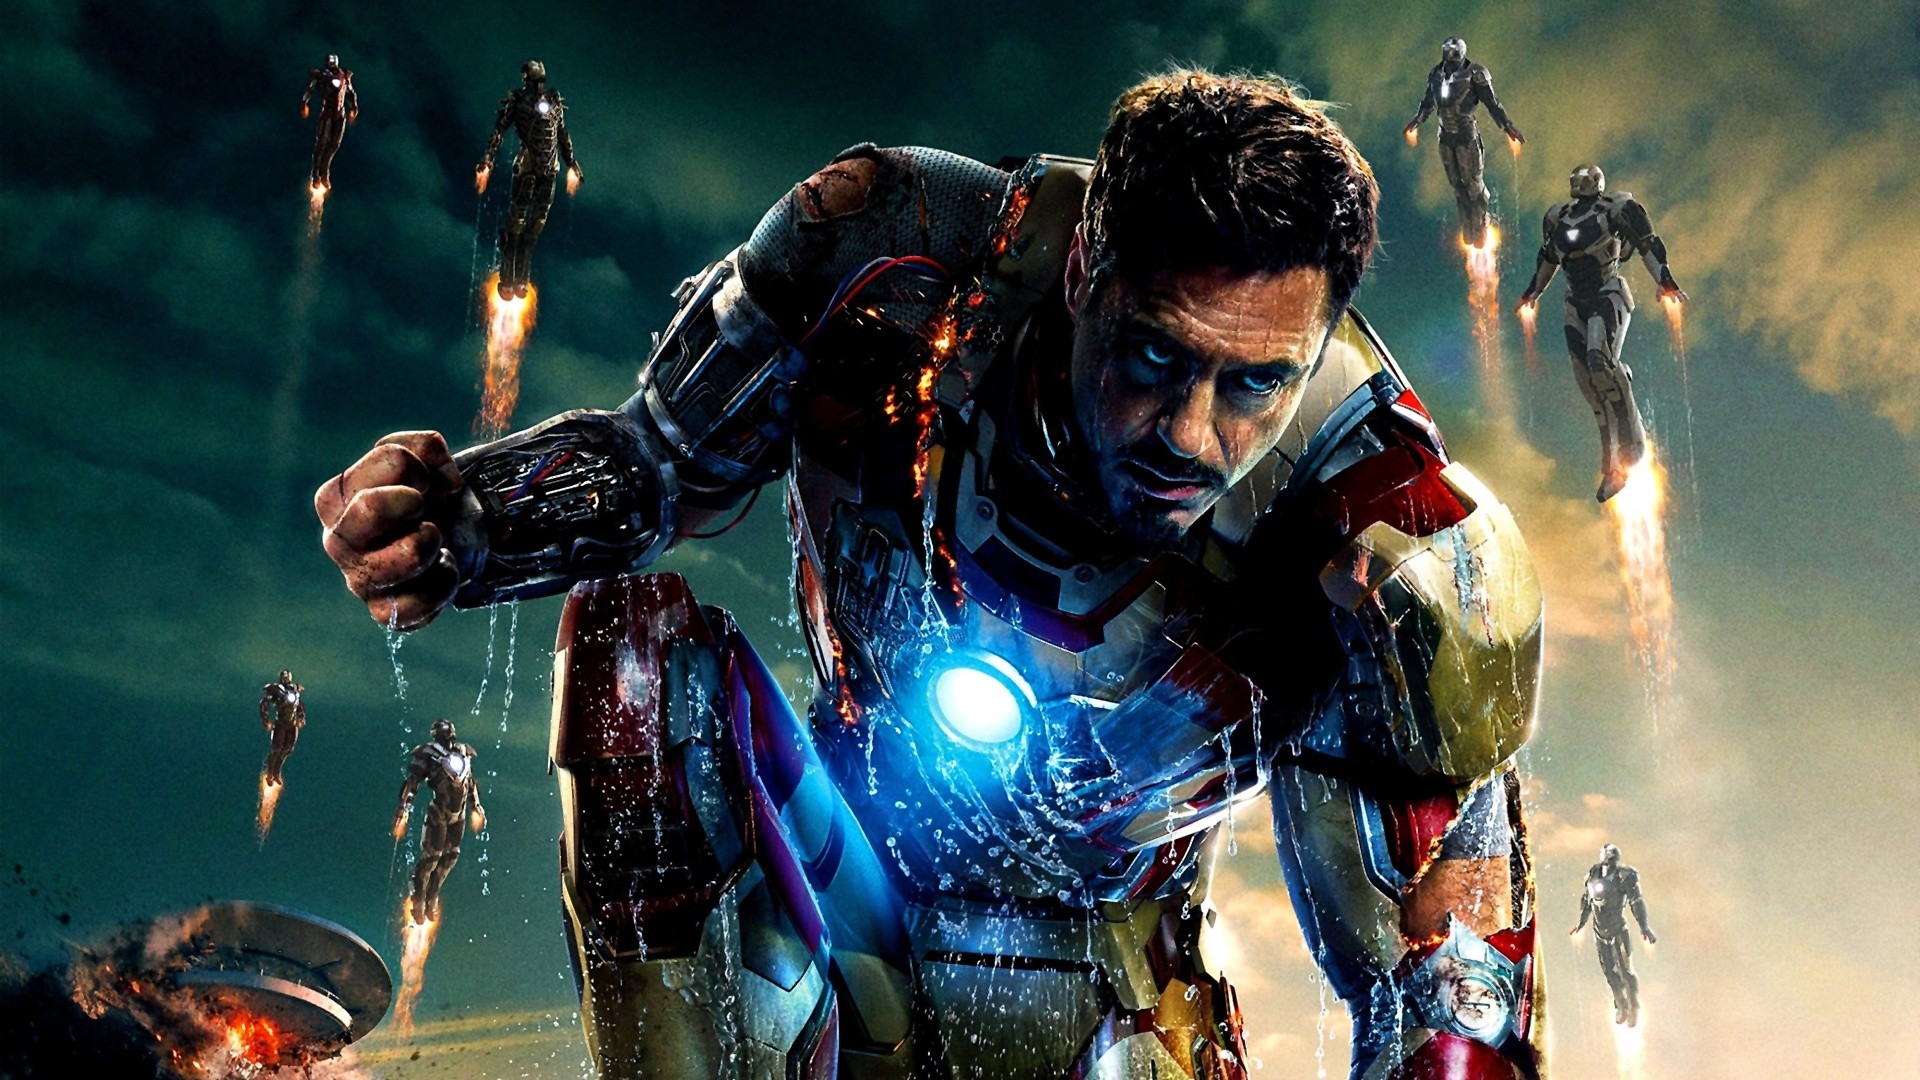 1920x1080 Iron Man Wallpapers in Best  px Resolutions | Brittani Noggle  AHDzBooK Wallpapers